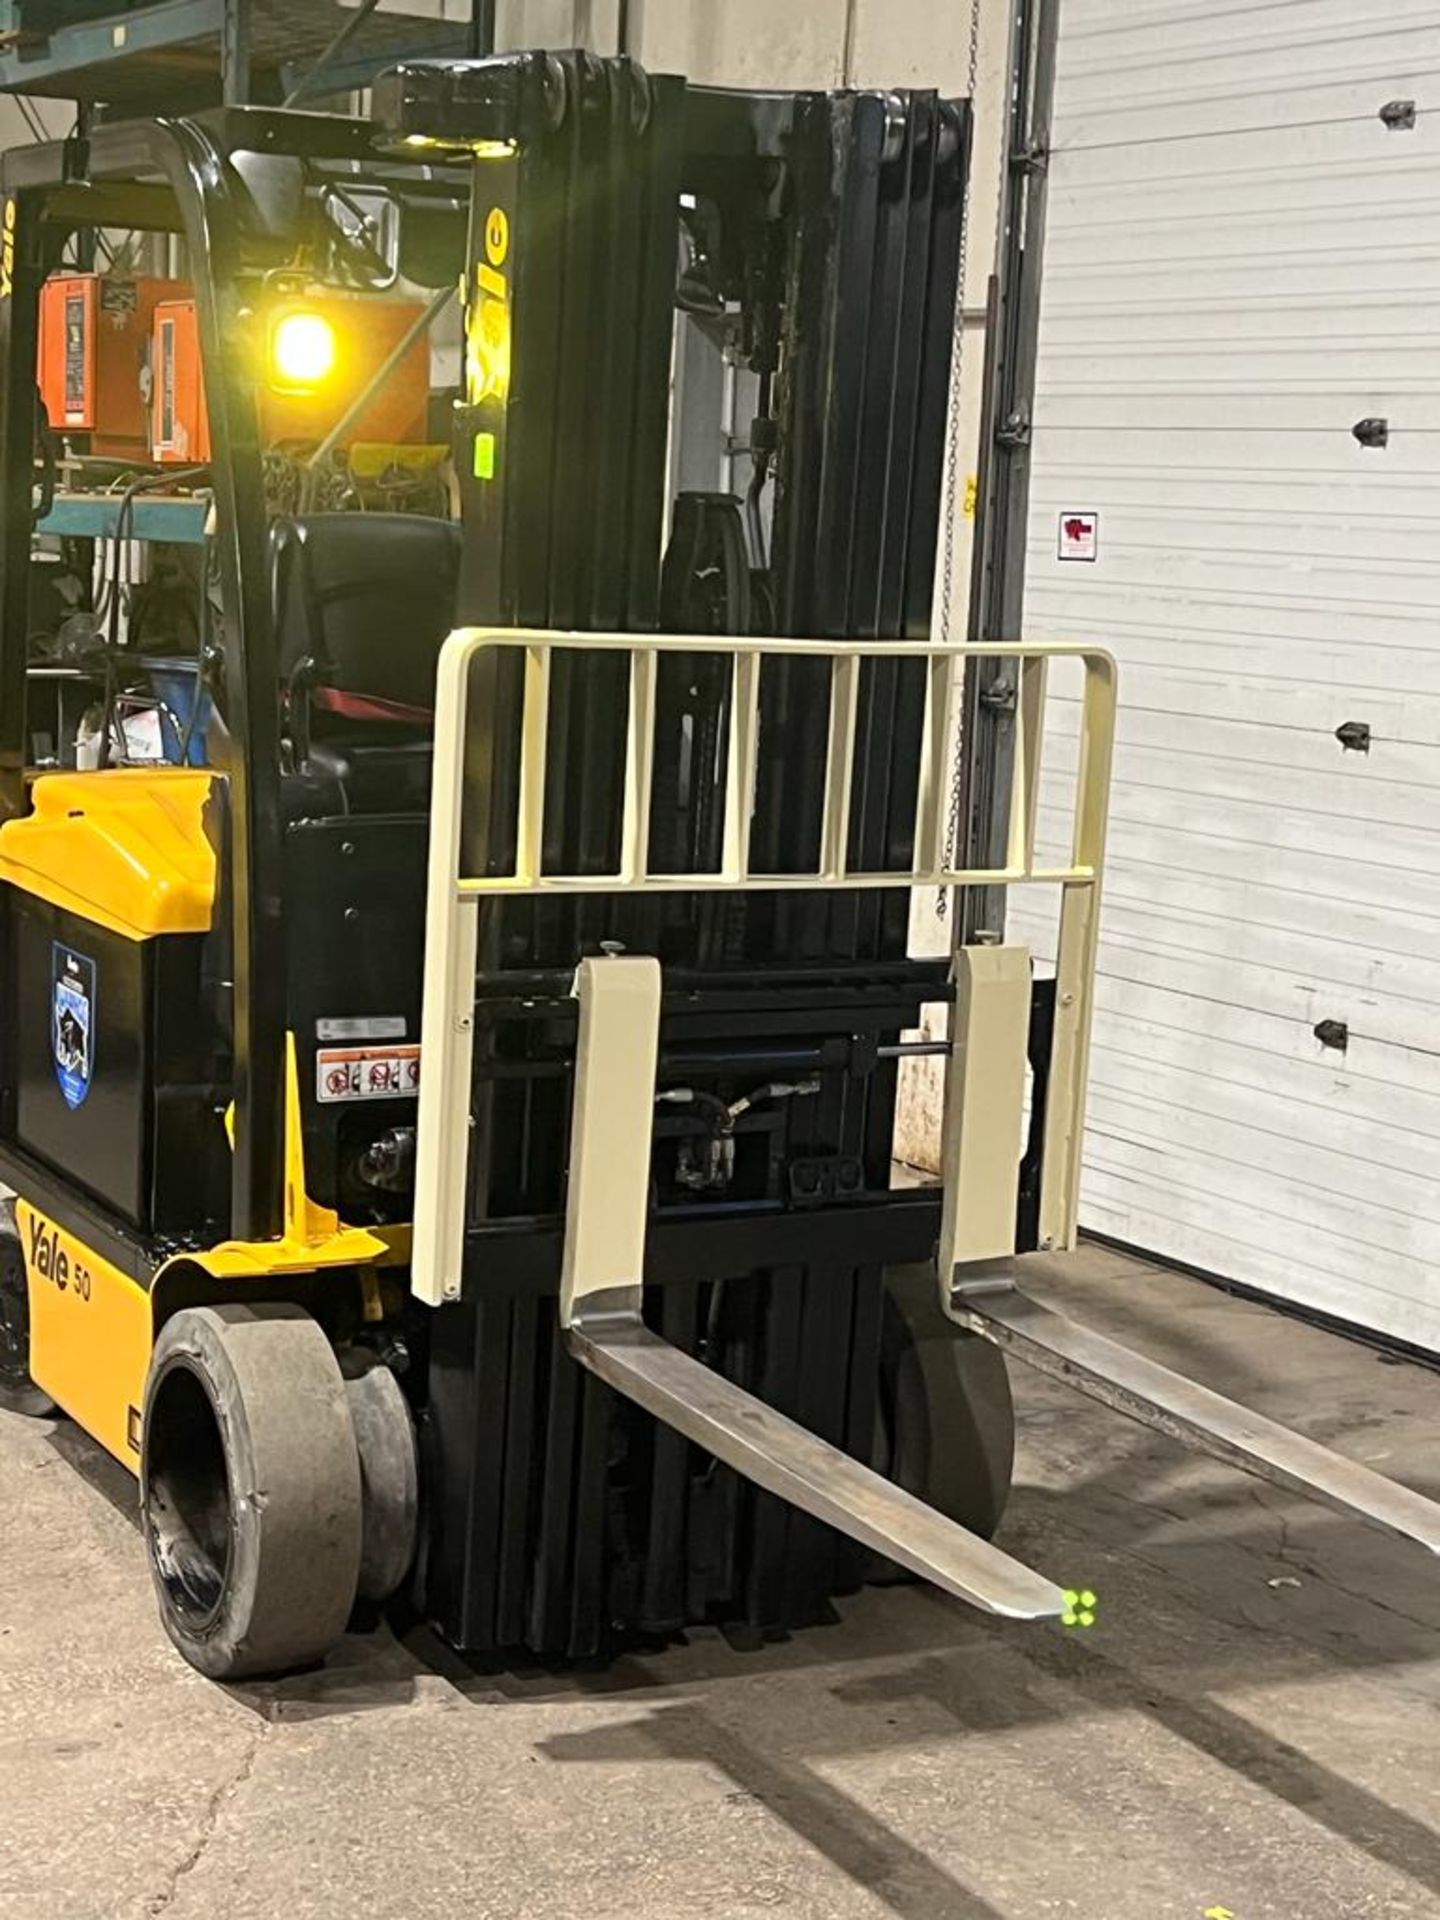 2016 Yale 5,000lbs Capacity EXPLOSION PROOF Forklift Electric 48V with Sideshift and 3-stage Mast - Image 3 of 4